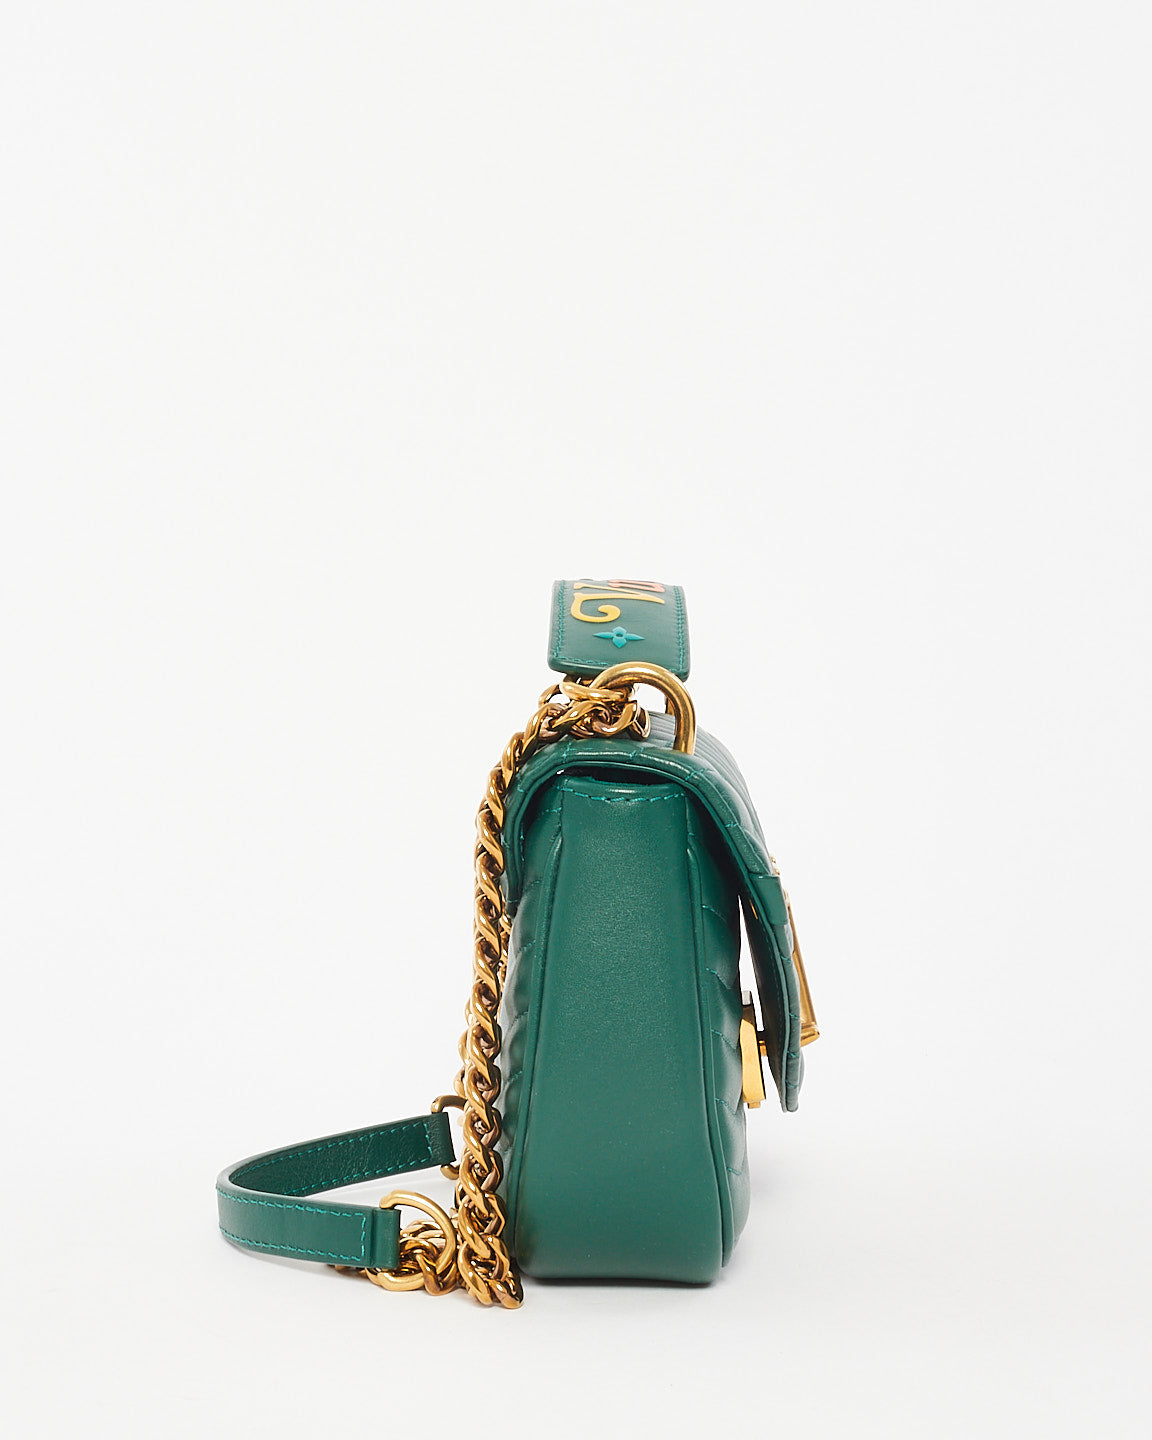 Louis Vuitton Emerald Green Leather New Wave Chain PM